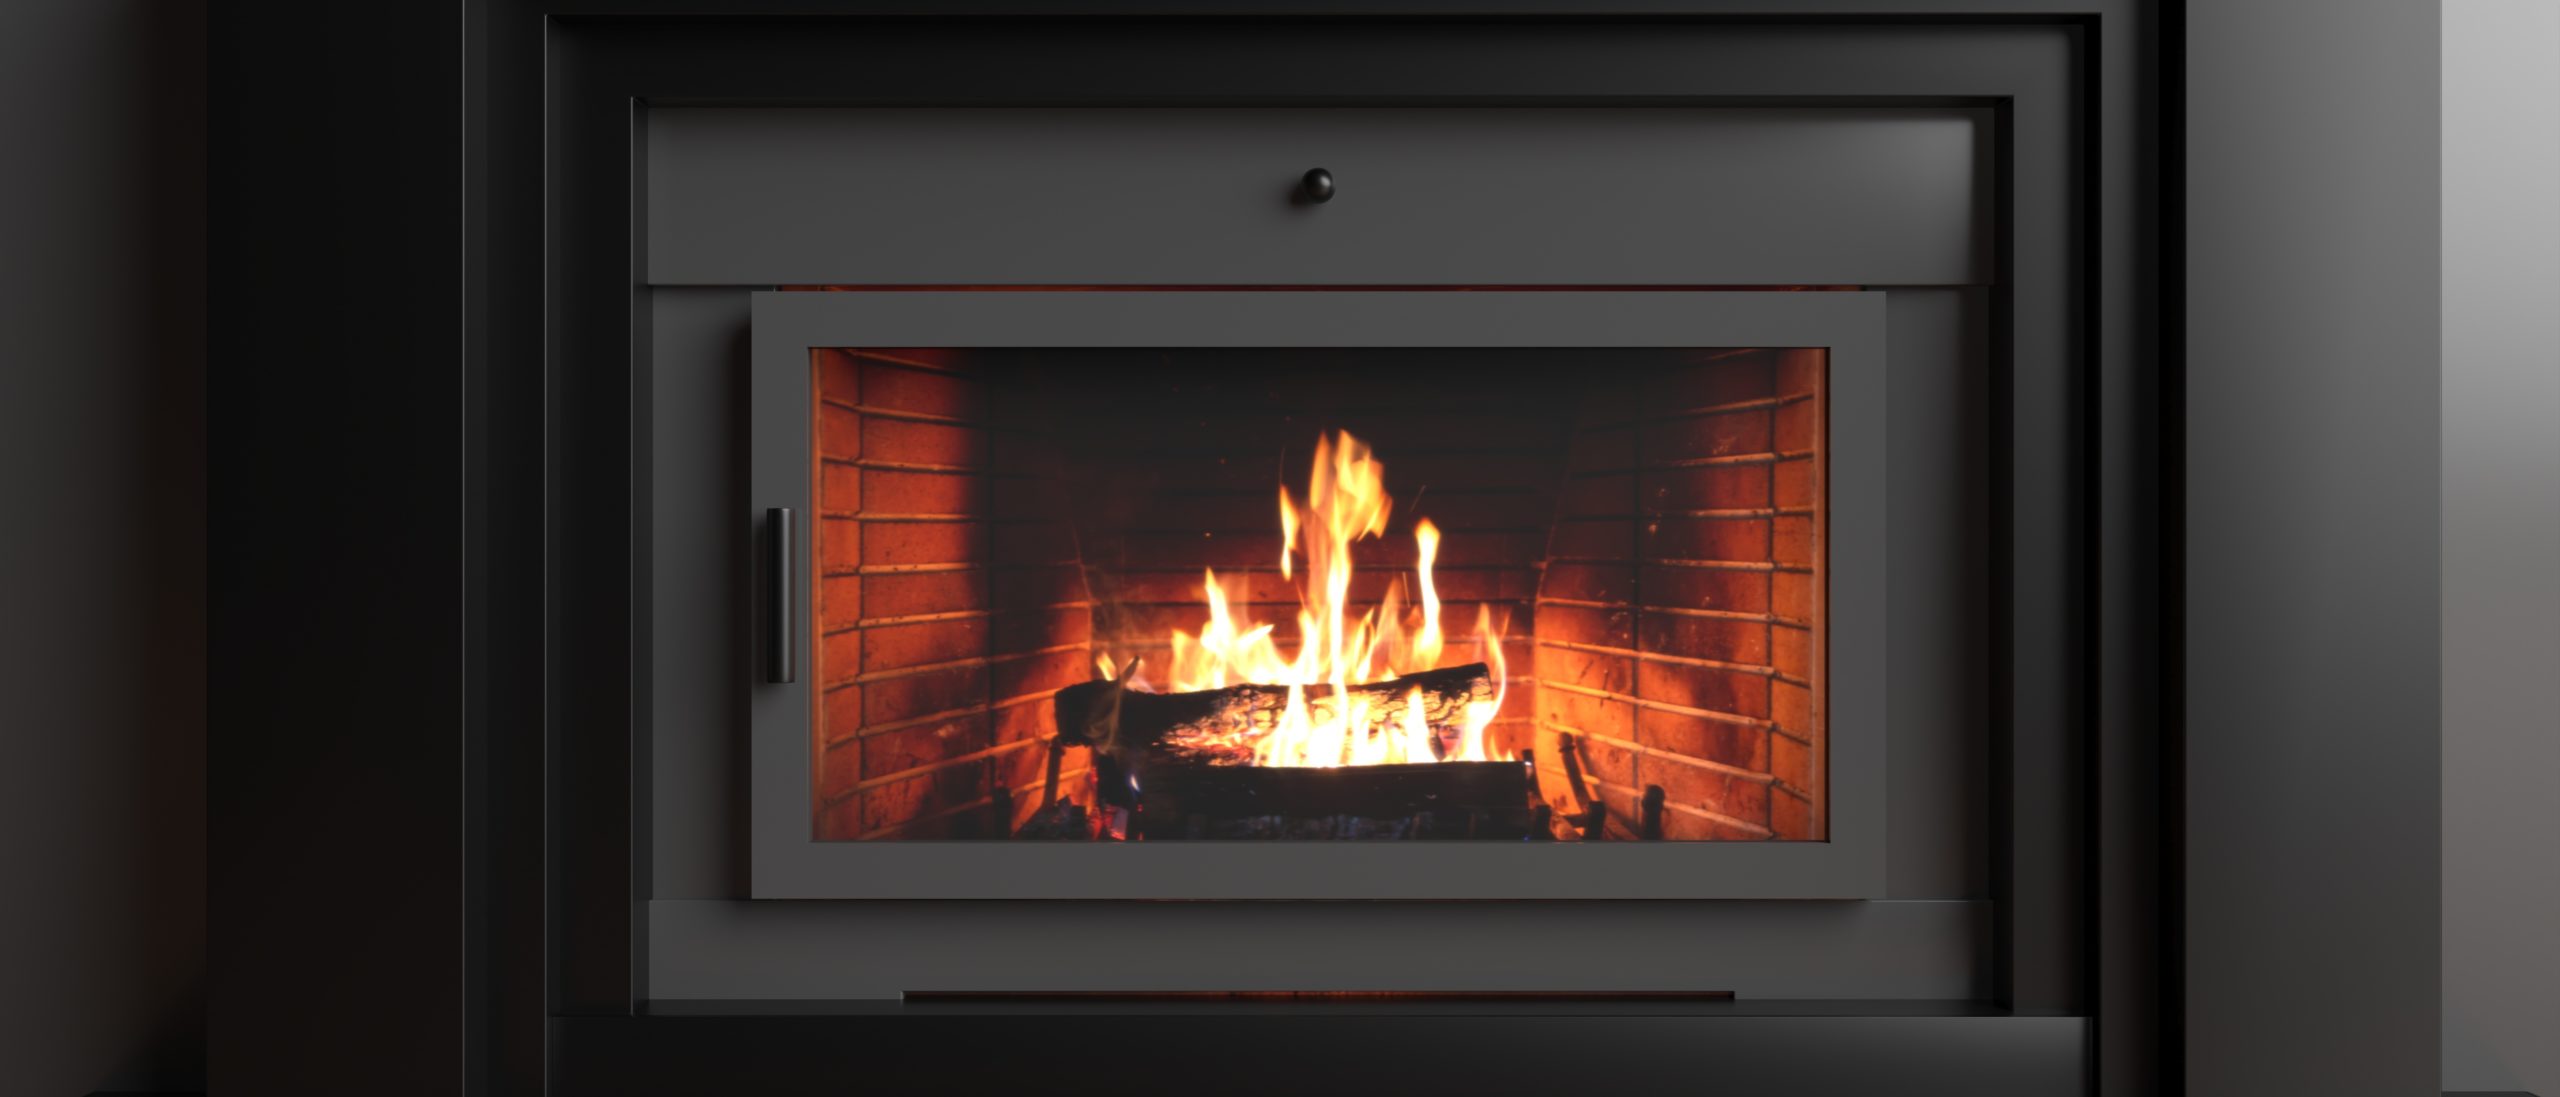 Burning fire in an energy stove fireplace radiates heat, warm mo